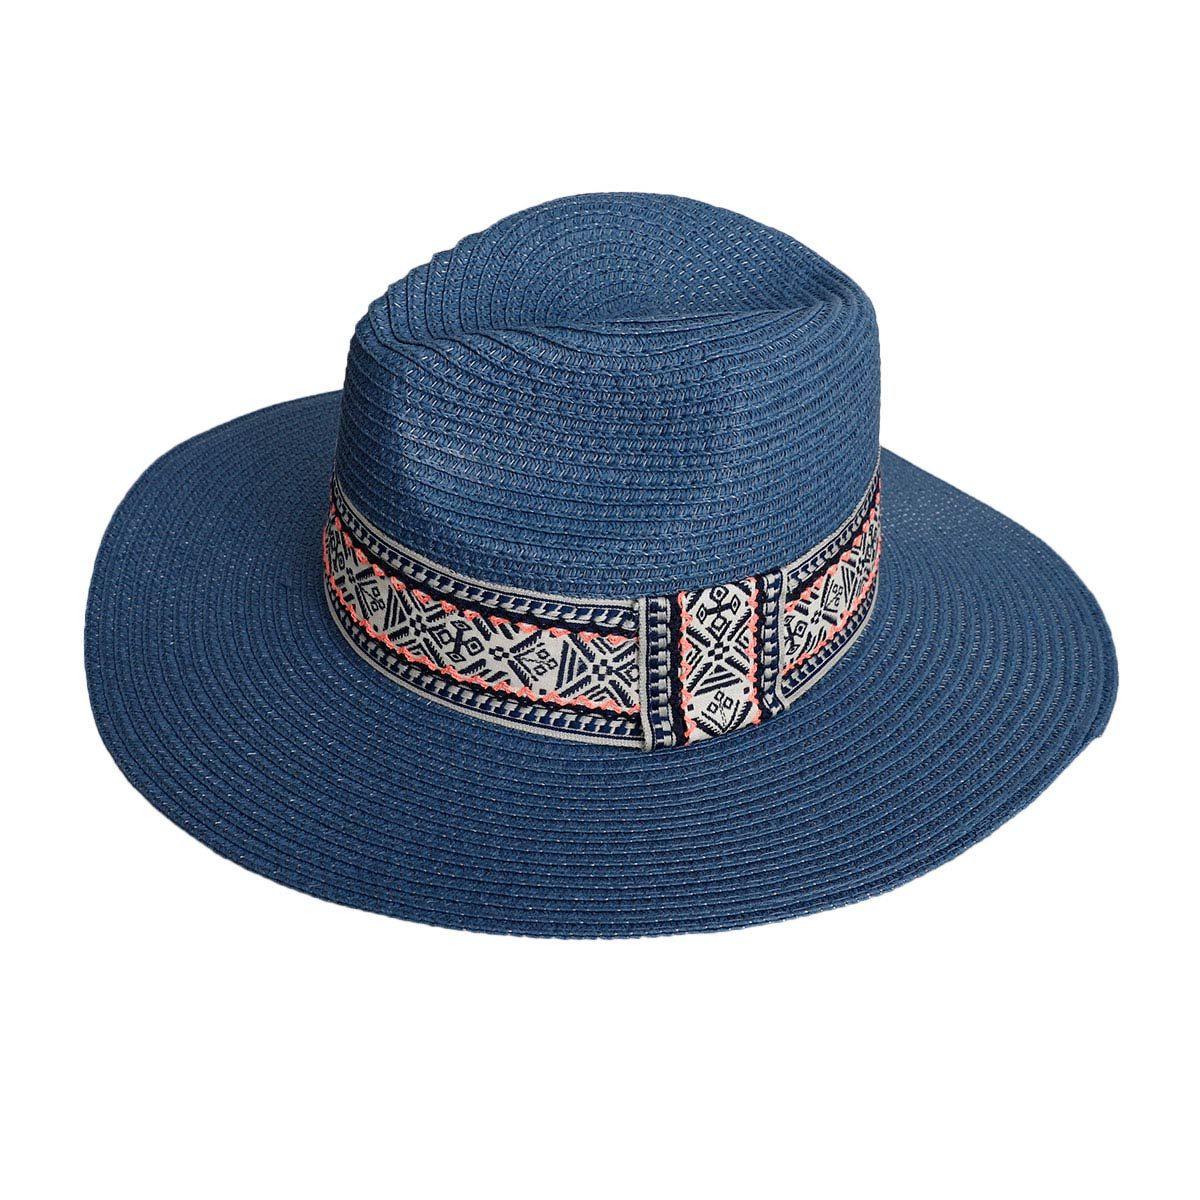 Navy Panama Hat with Blue Bohemian Style Band